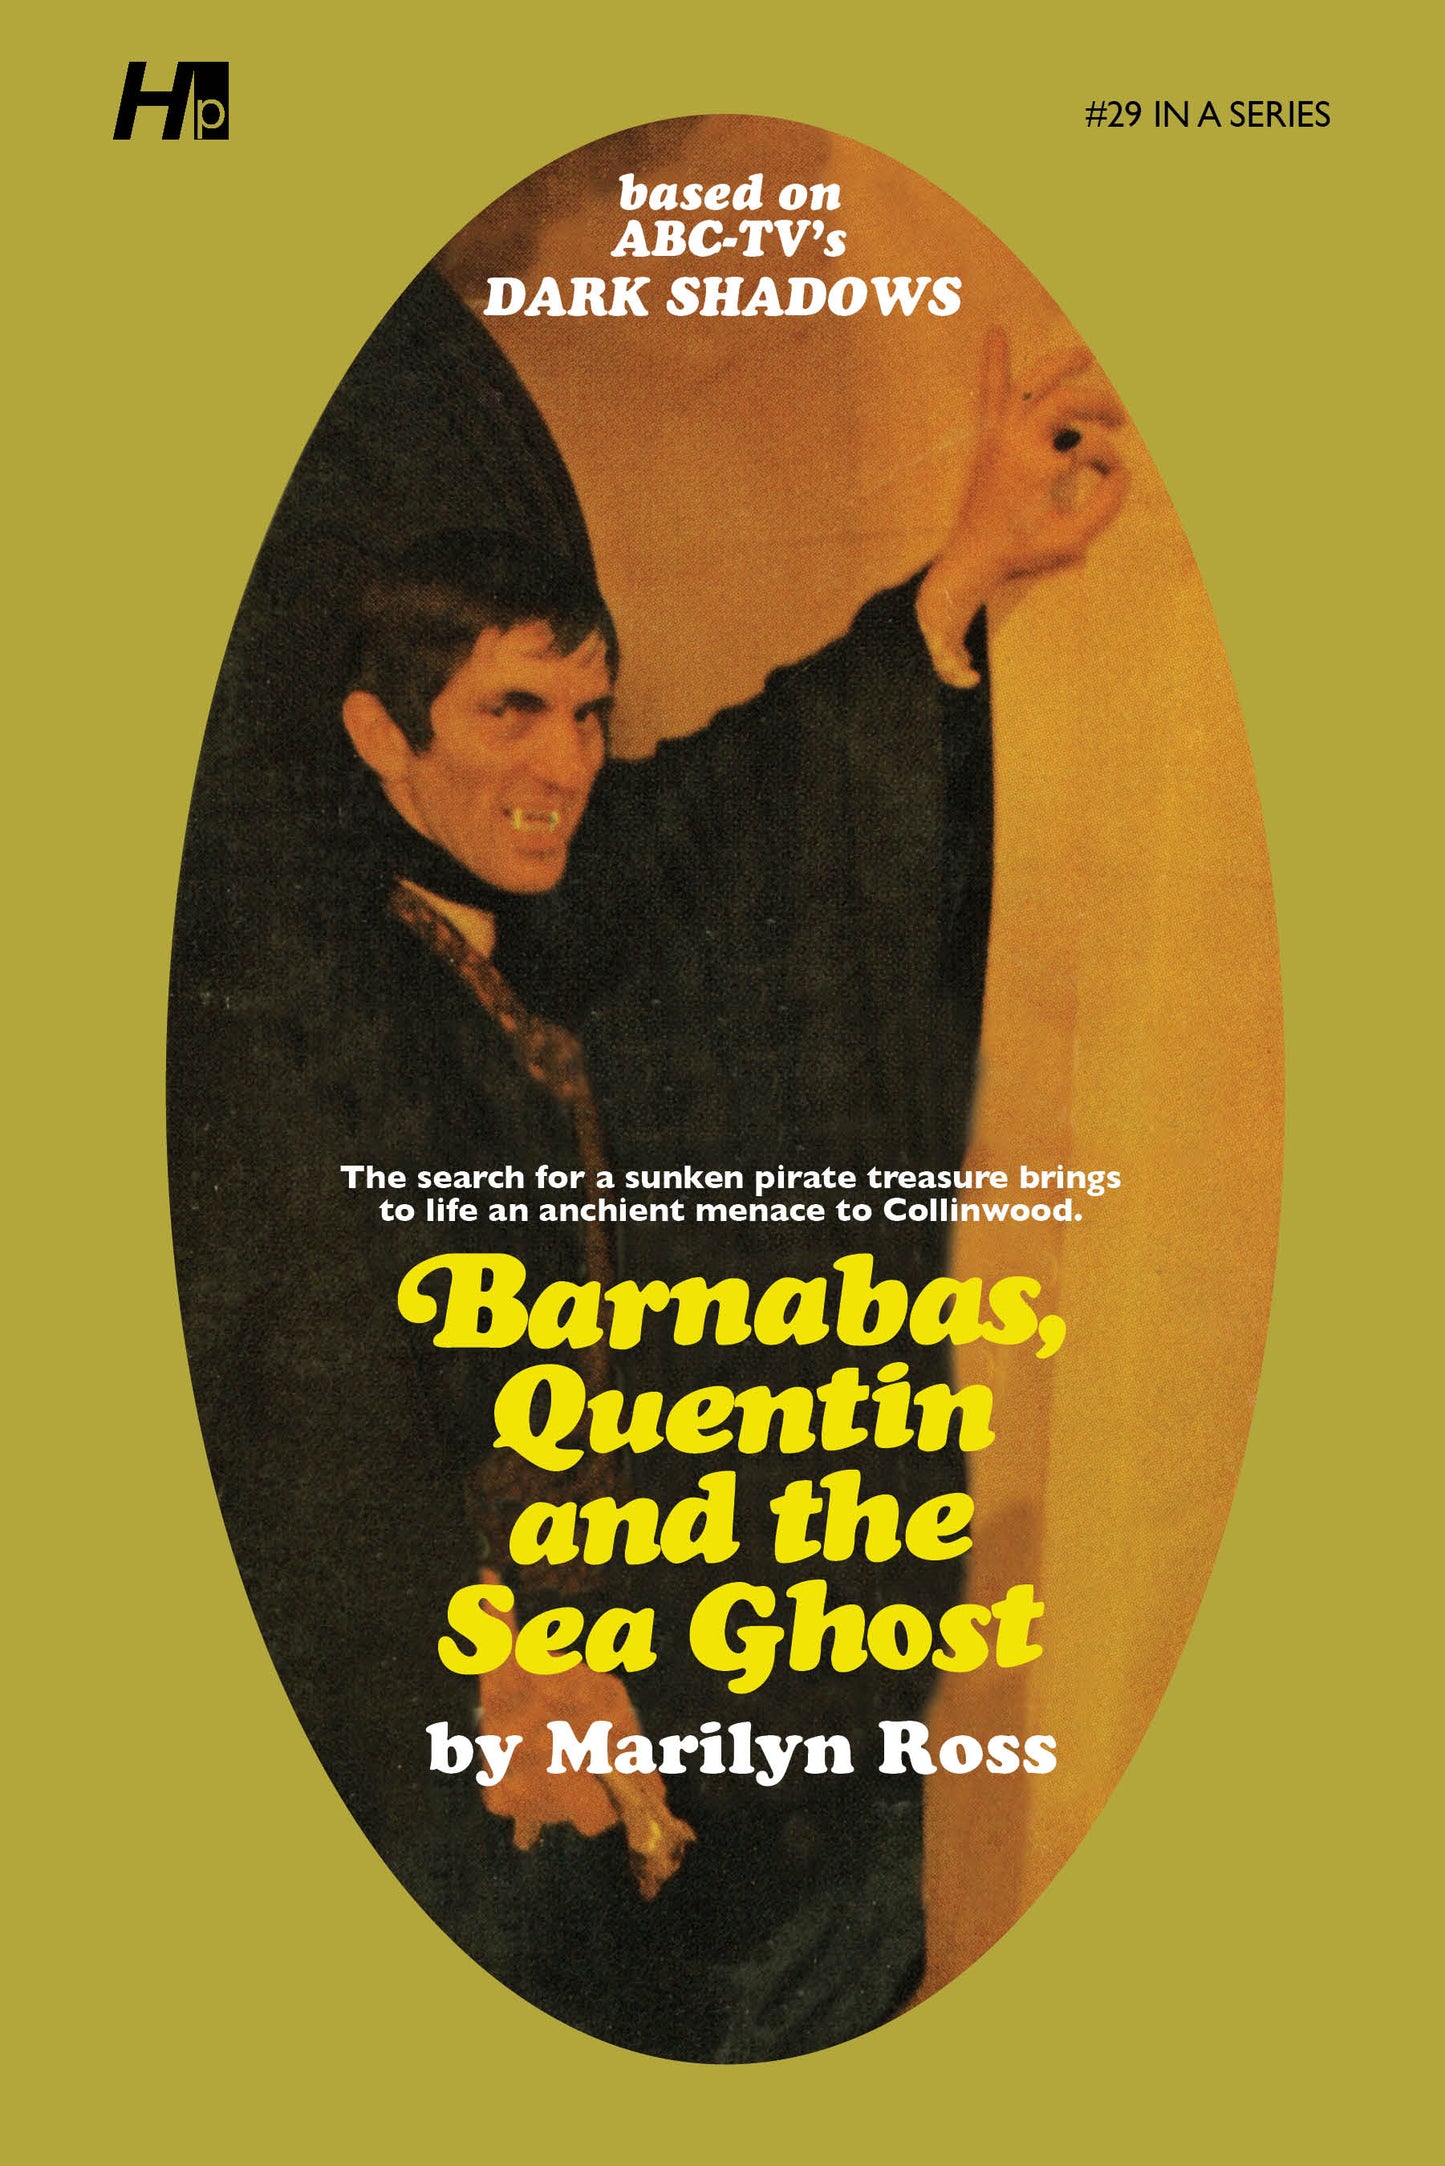 Dark Shadows #29: Barnabas, Quentin and The Sea Ghost [Paperback]